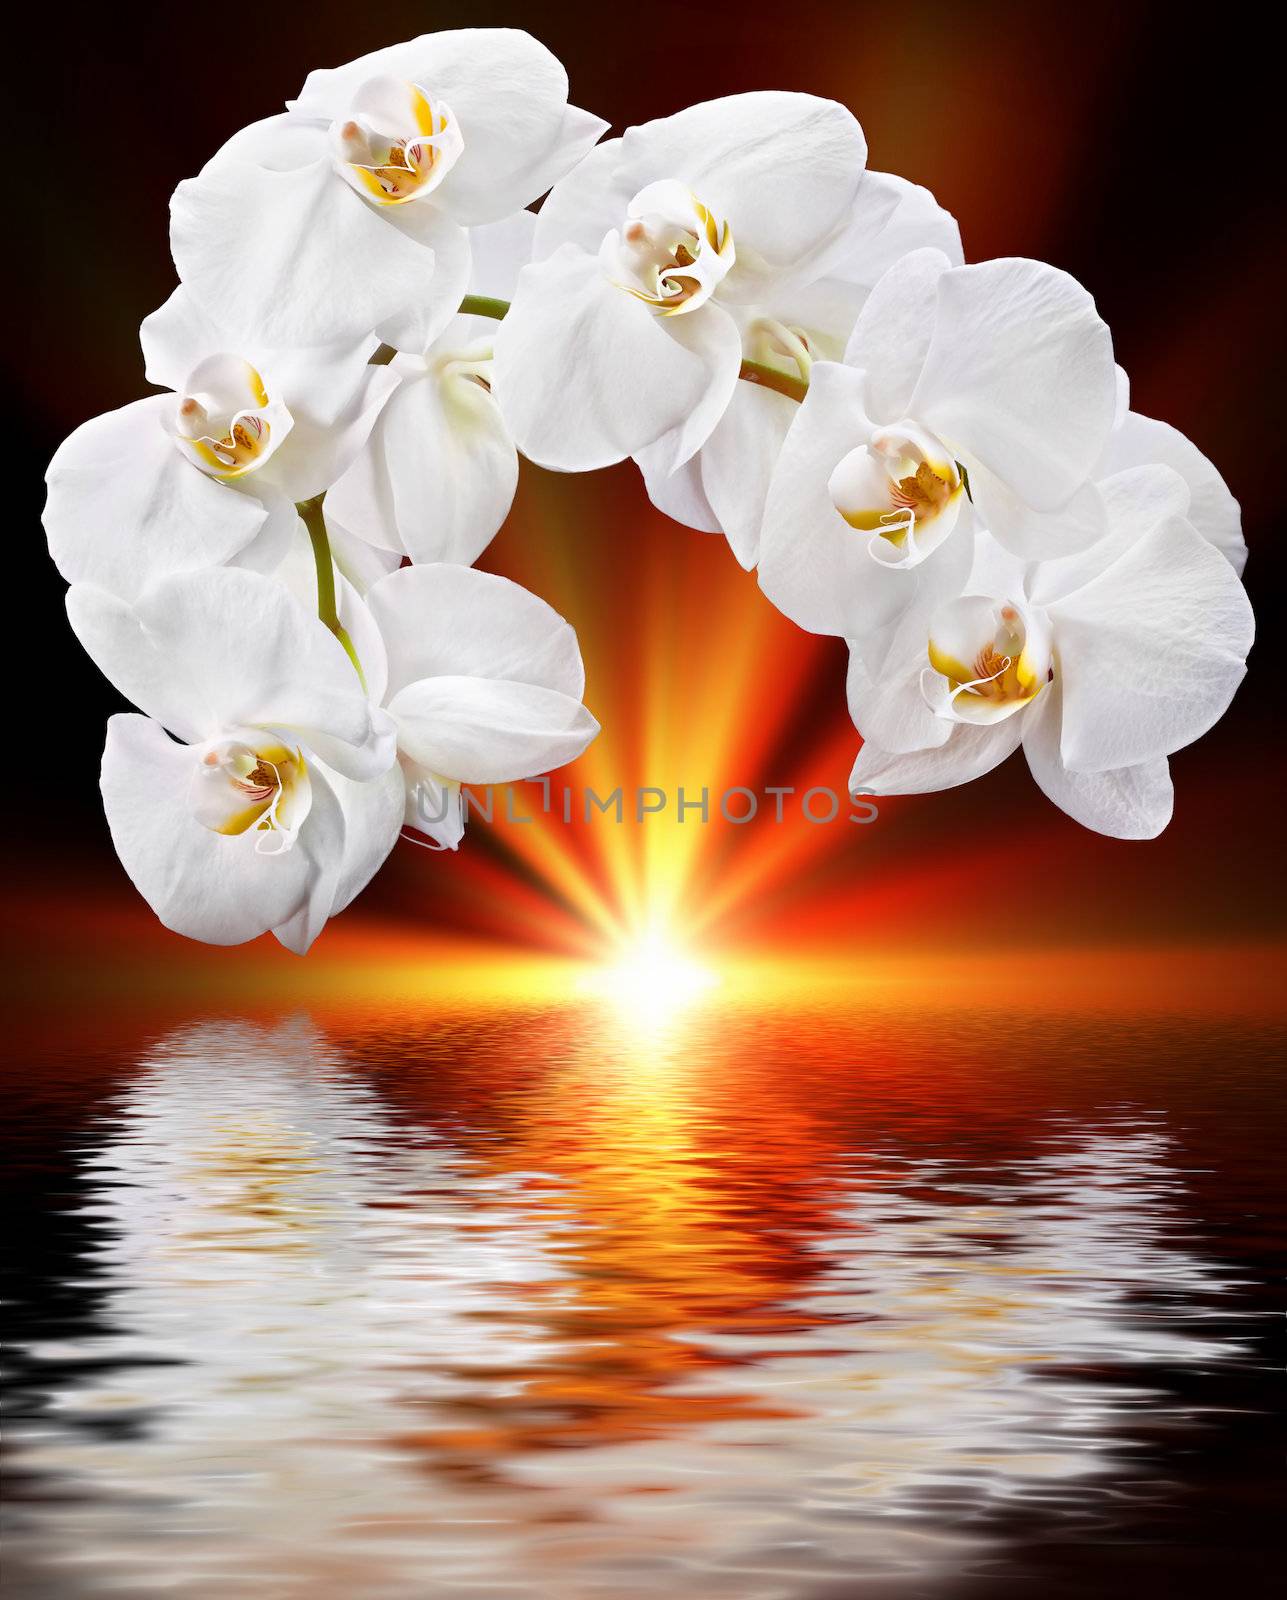 White orchid, sun and water reflection